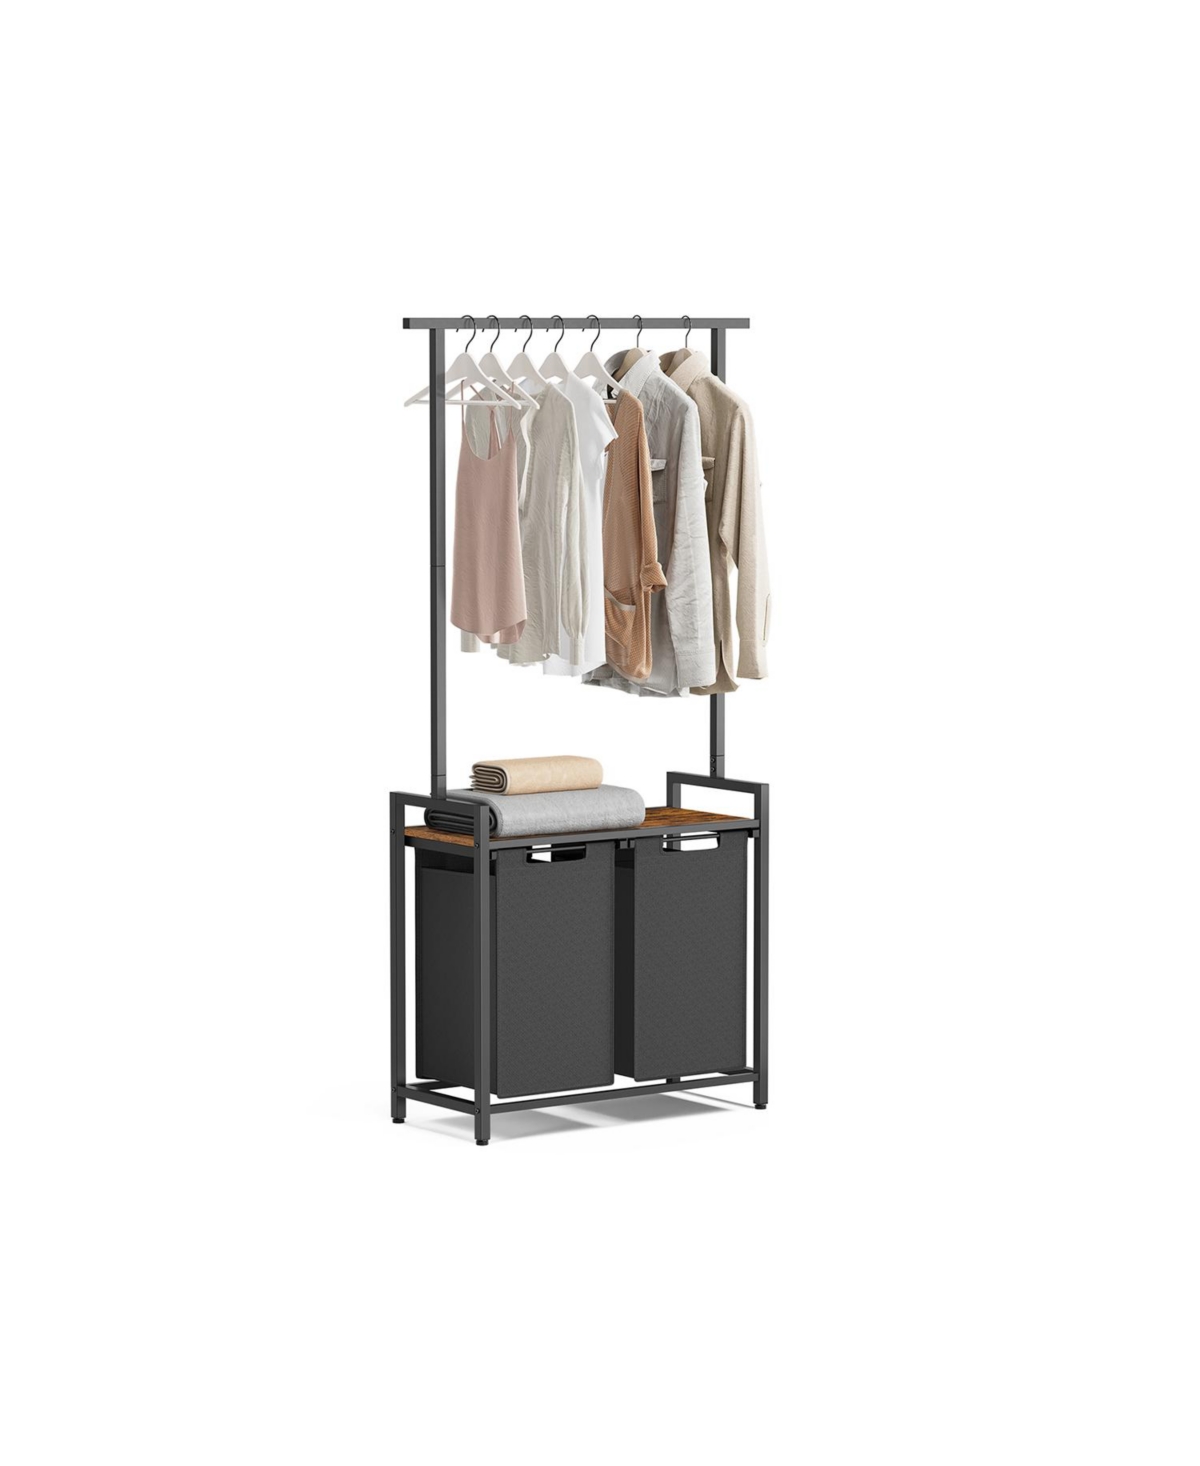 2 Section Laundry Sorter With Clothes Rack - Grey